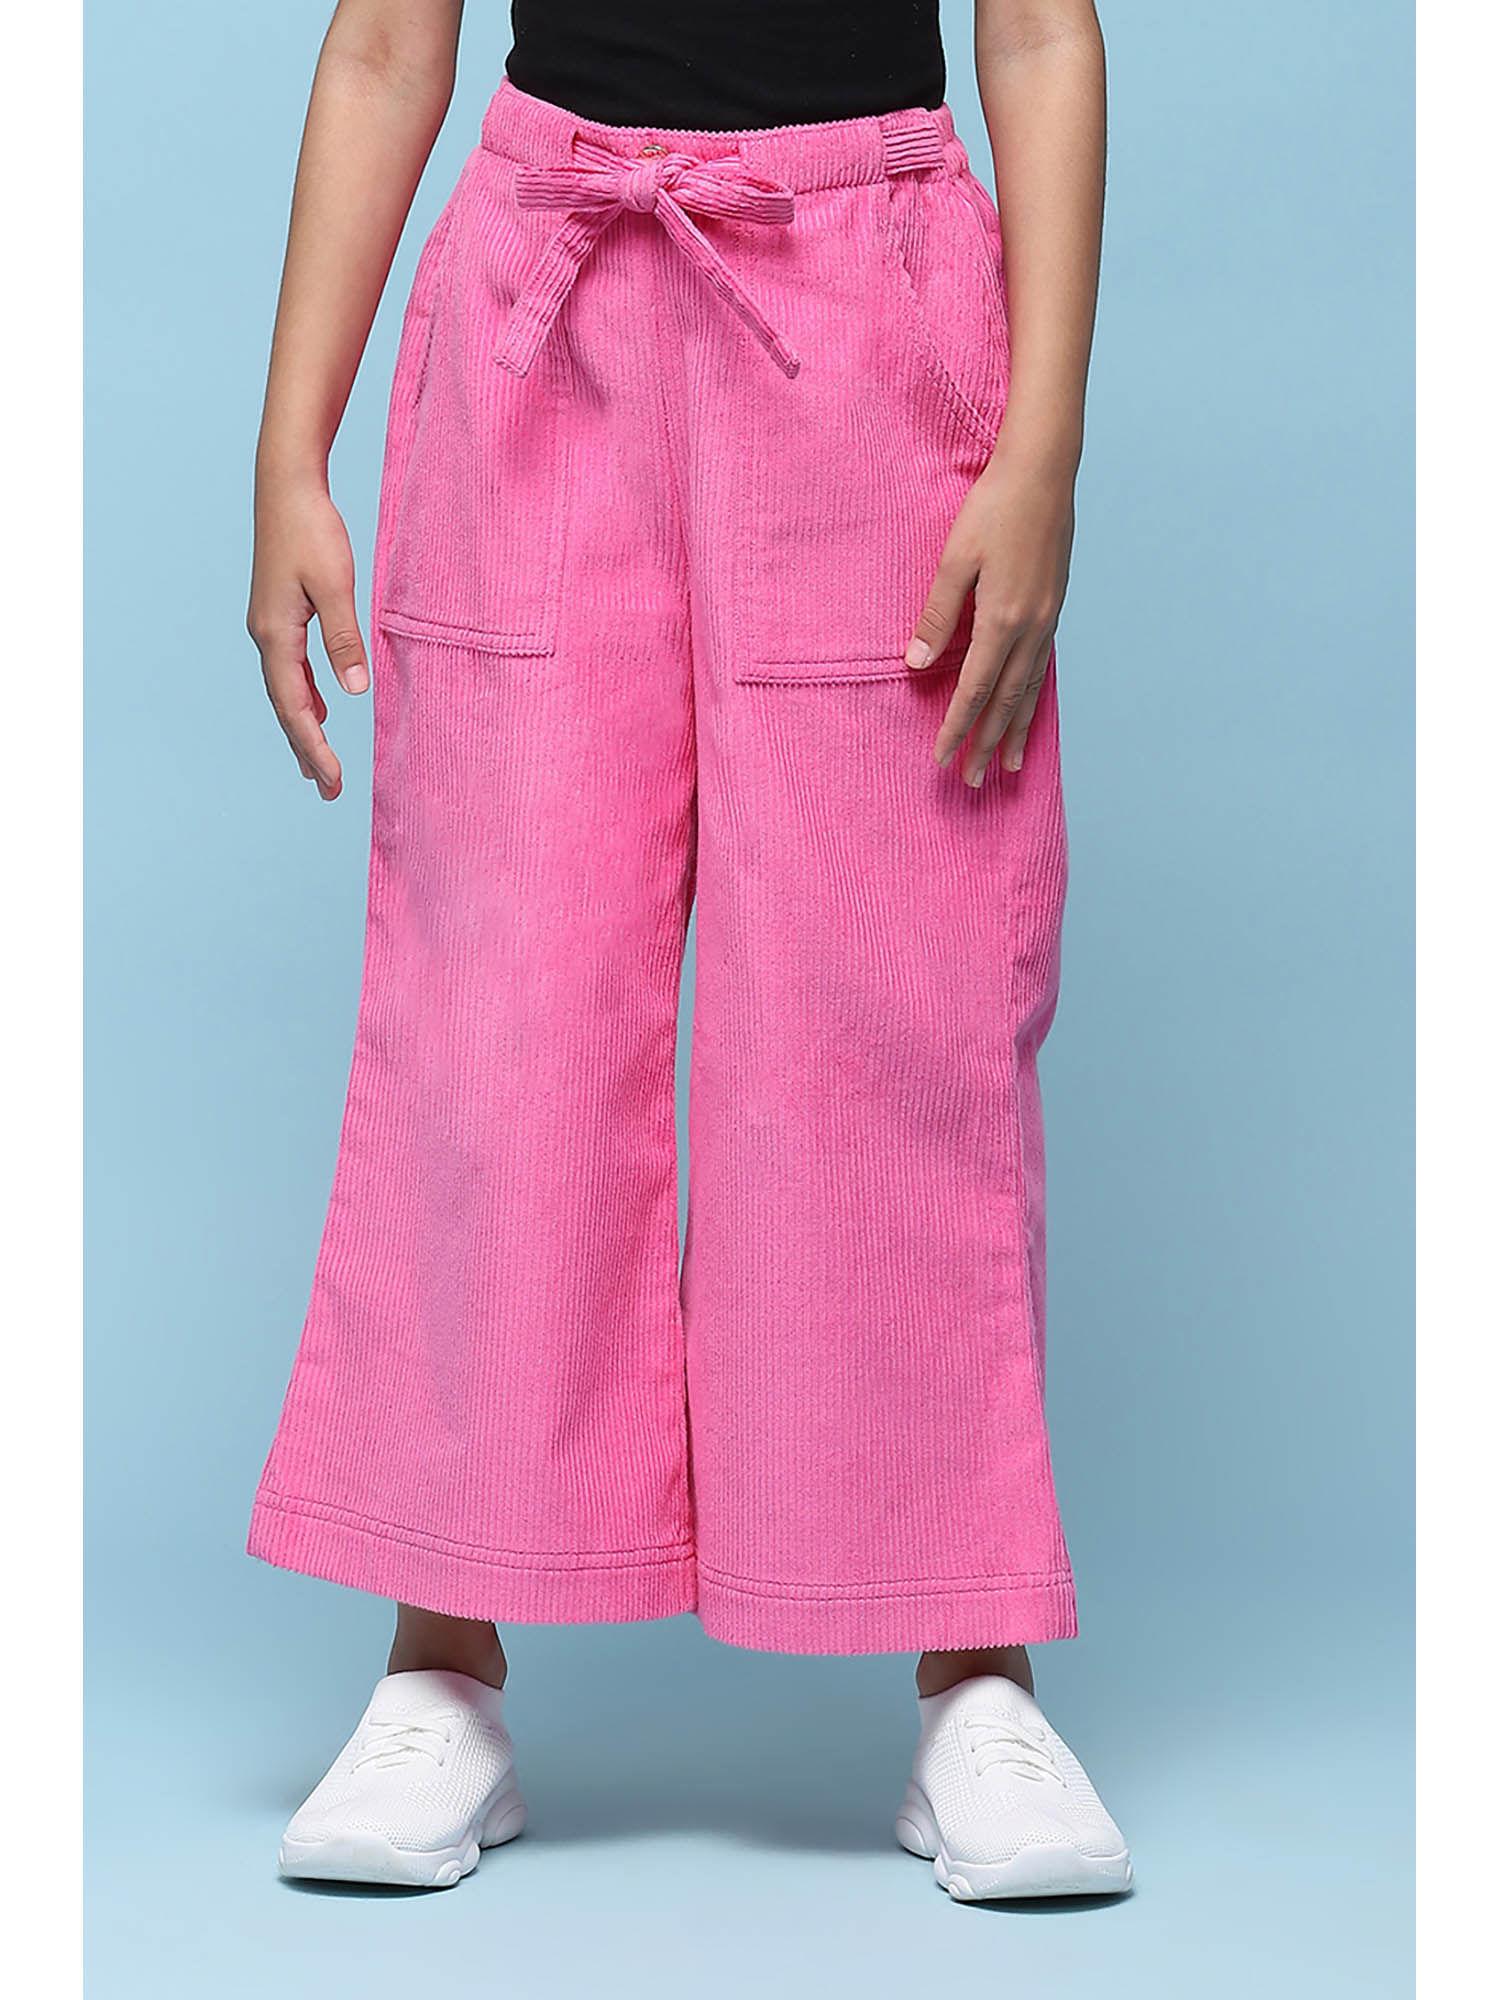 doby pink solid pant